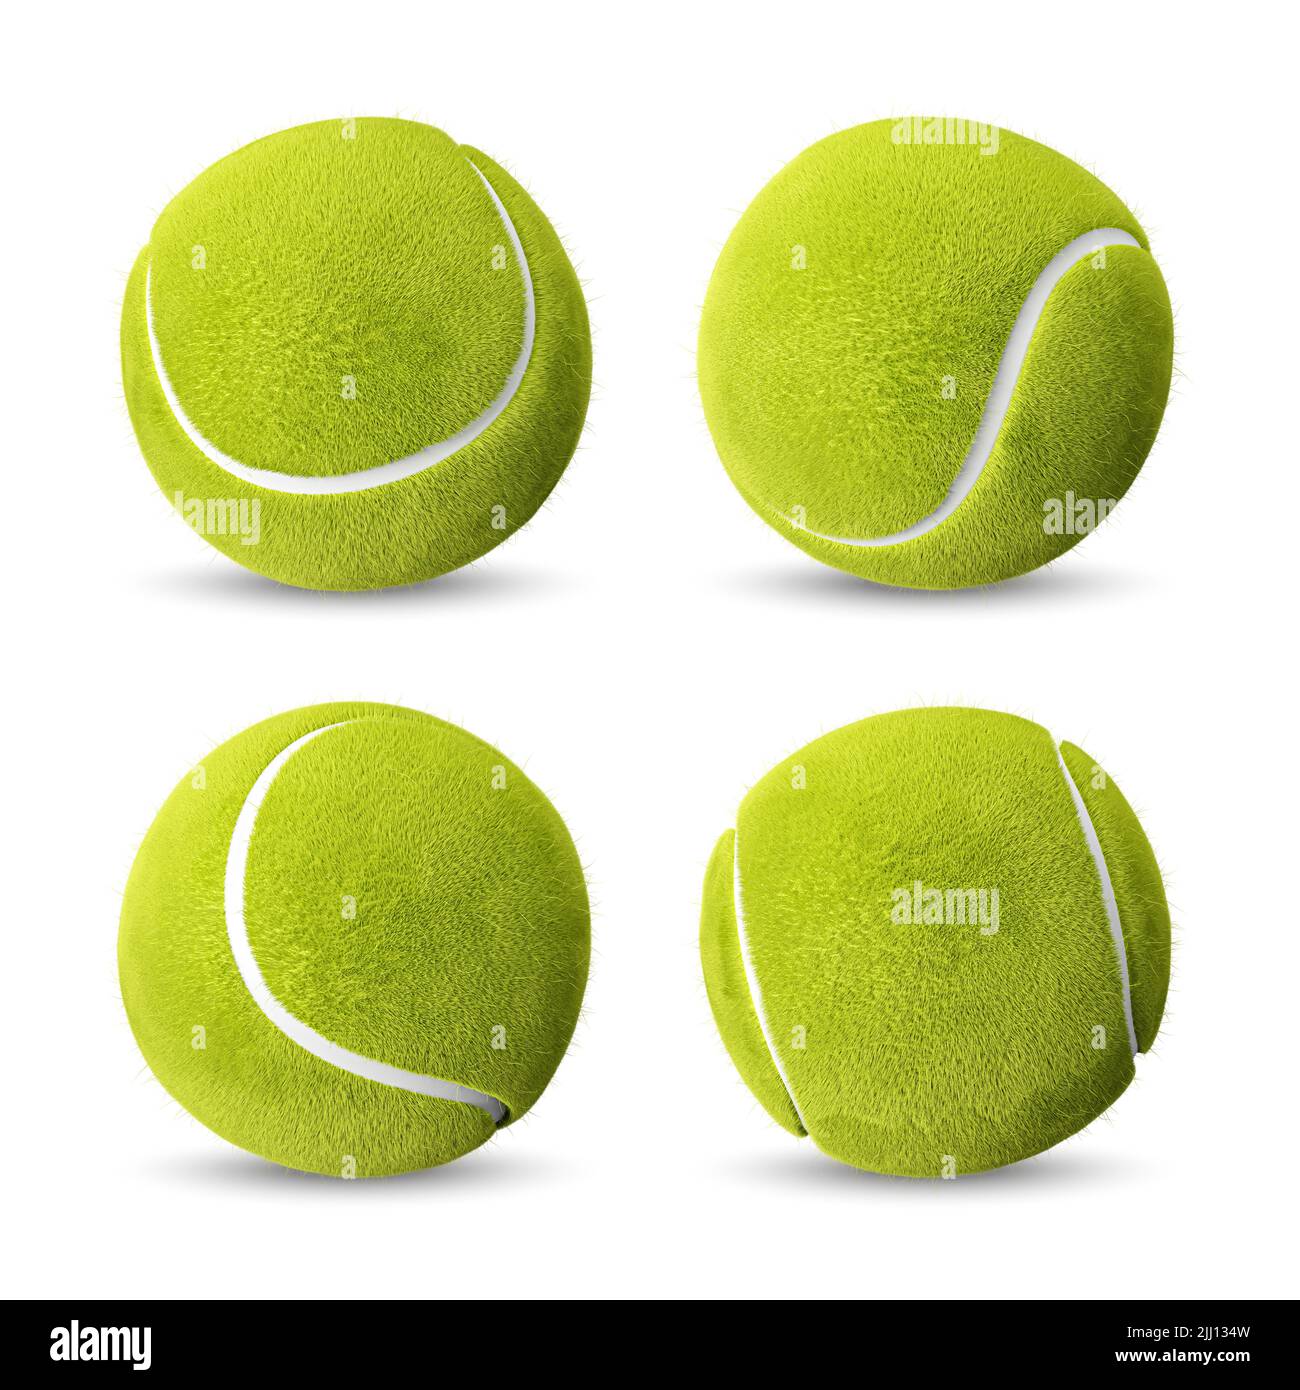 Tennis balls . Isolated . Embedded clipping paths . 3D rendering . Stock Photo